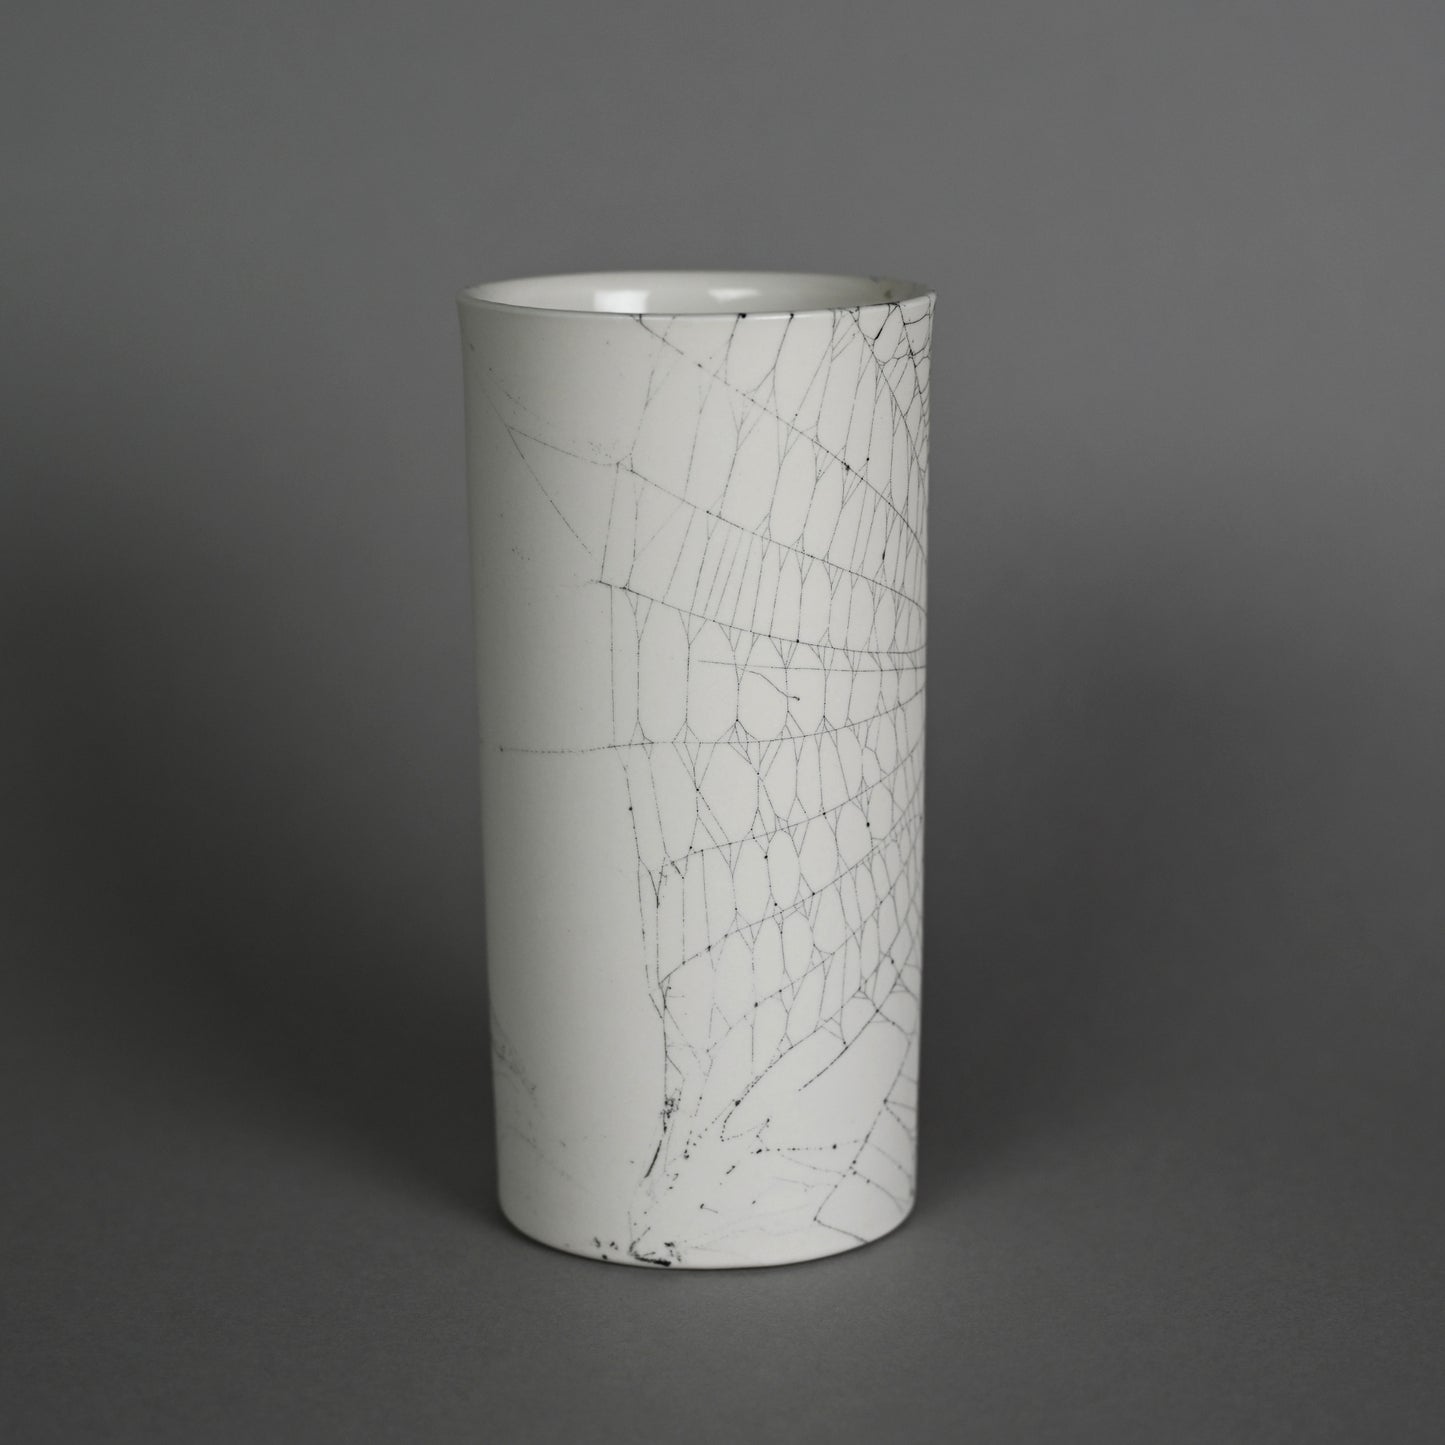 Web on Clay (184), Collected September 24, 2022